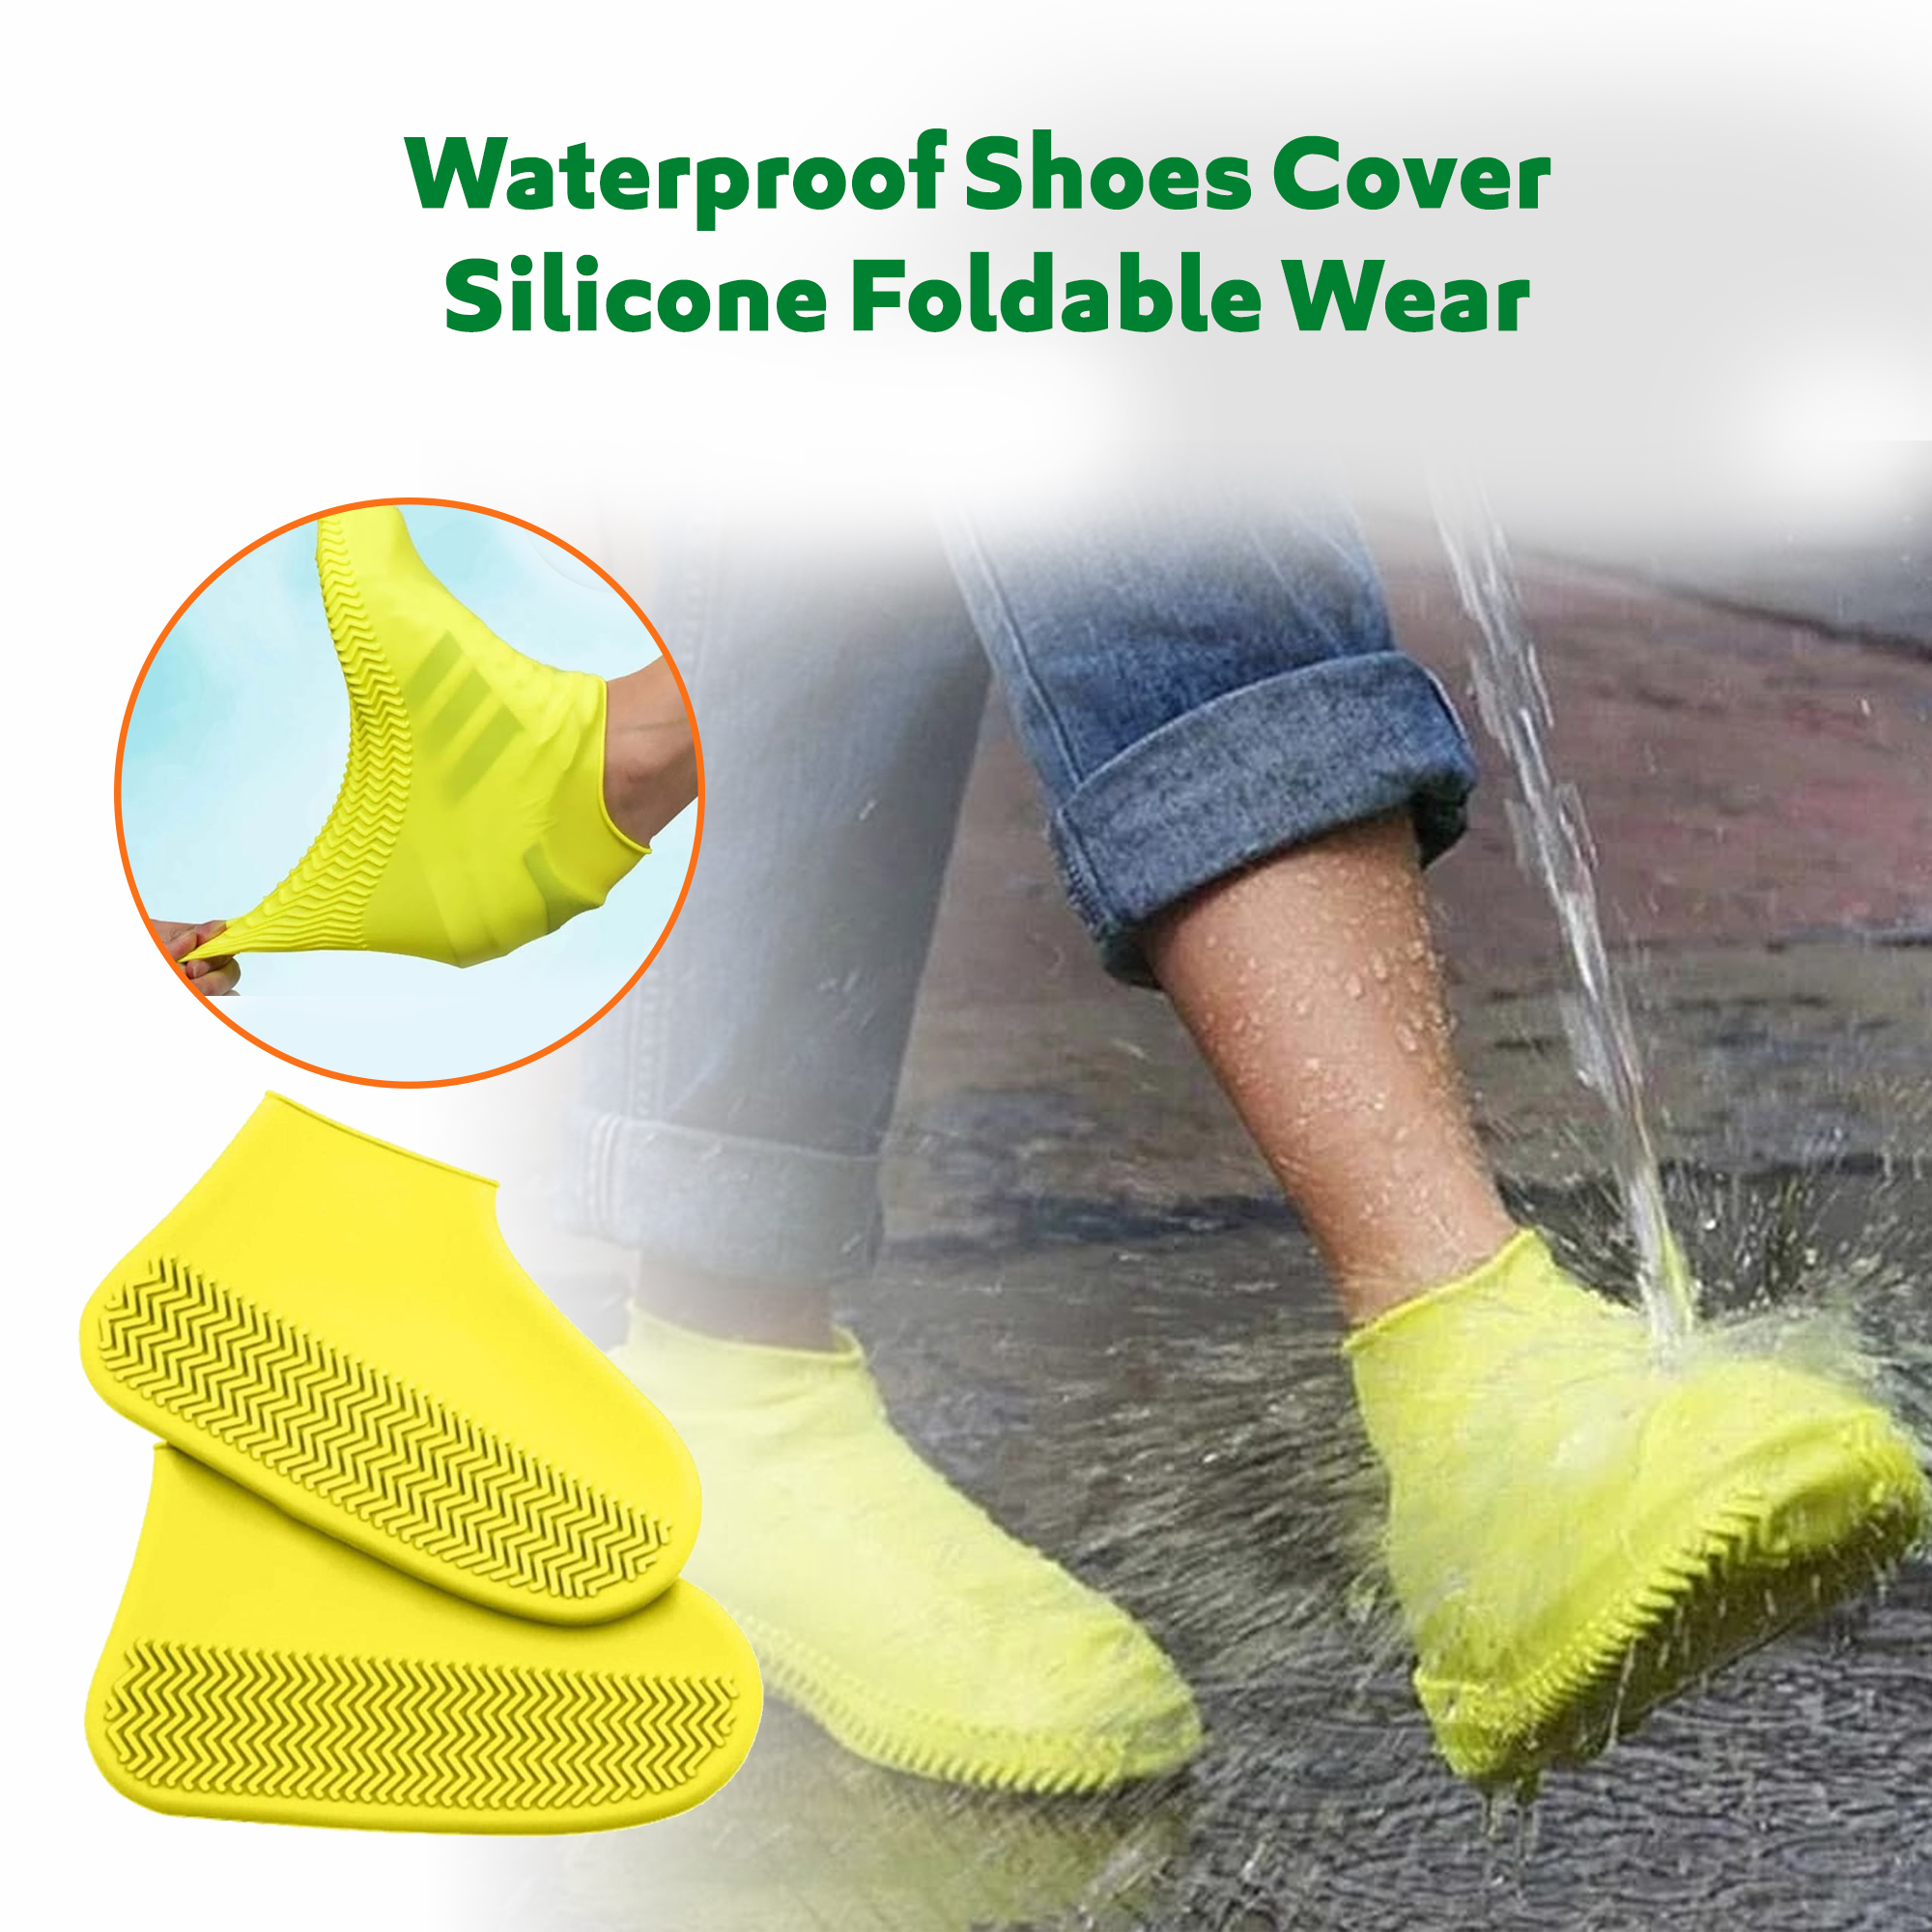 Waterproof Rain Shoes Cover Non-Slip Silicone Overshoes Boot Covers Unisex Shoes 